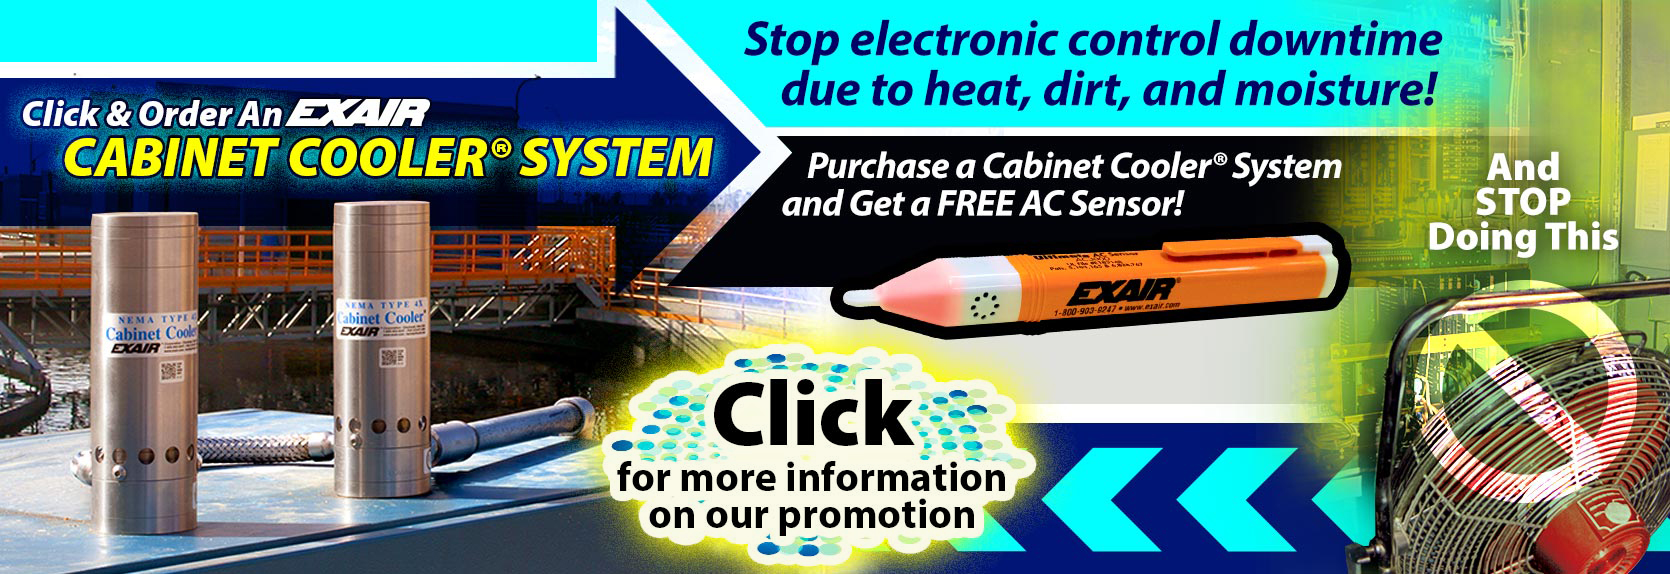 EXAIR's Cabinet Cooler Promotion